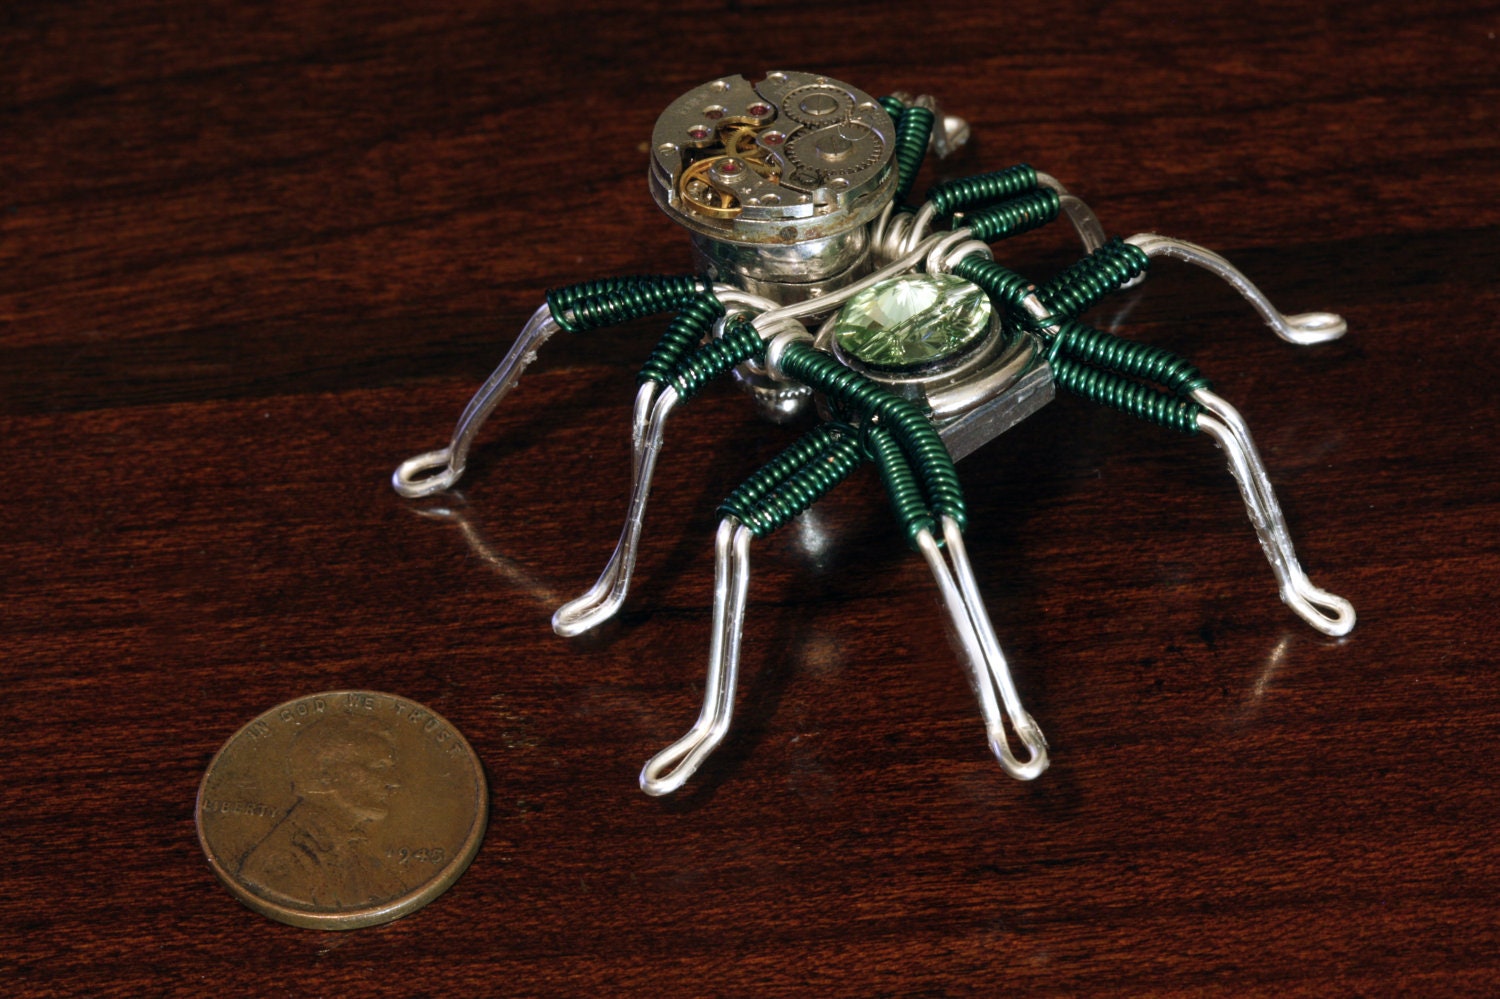 Steampunk Spider Lapel pin Sculpture with Chrysolite Swarovski Crystal and Antique Watch movement